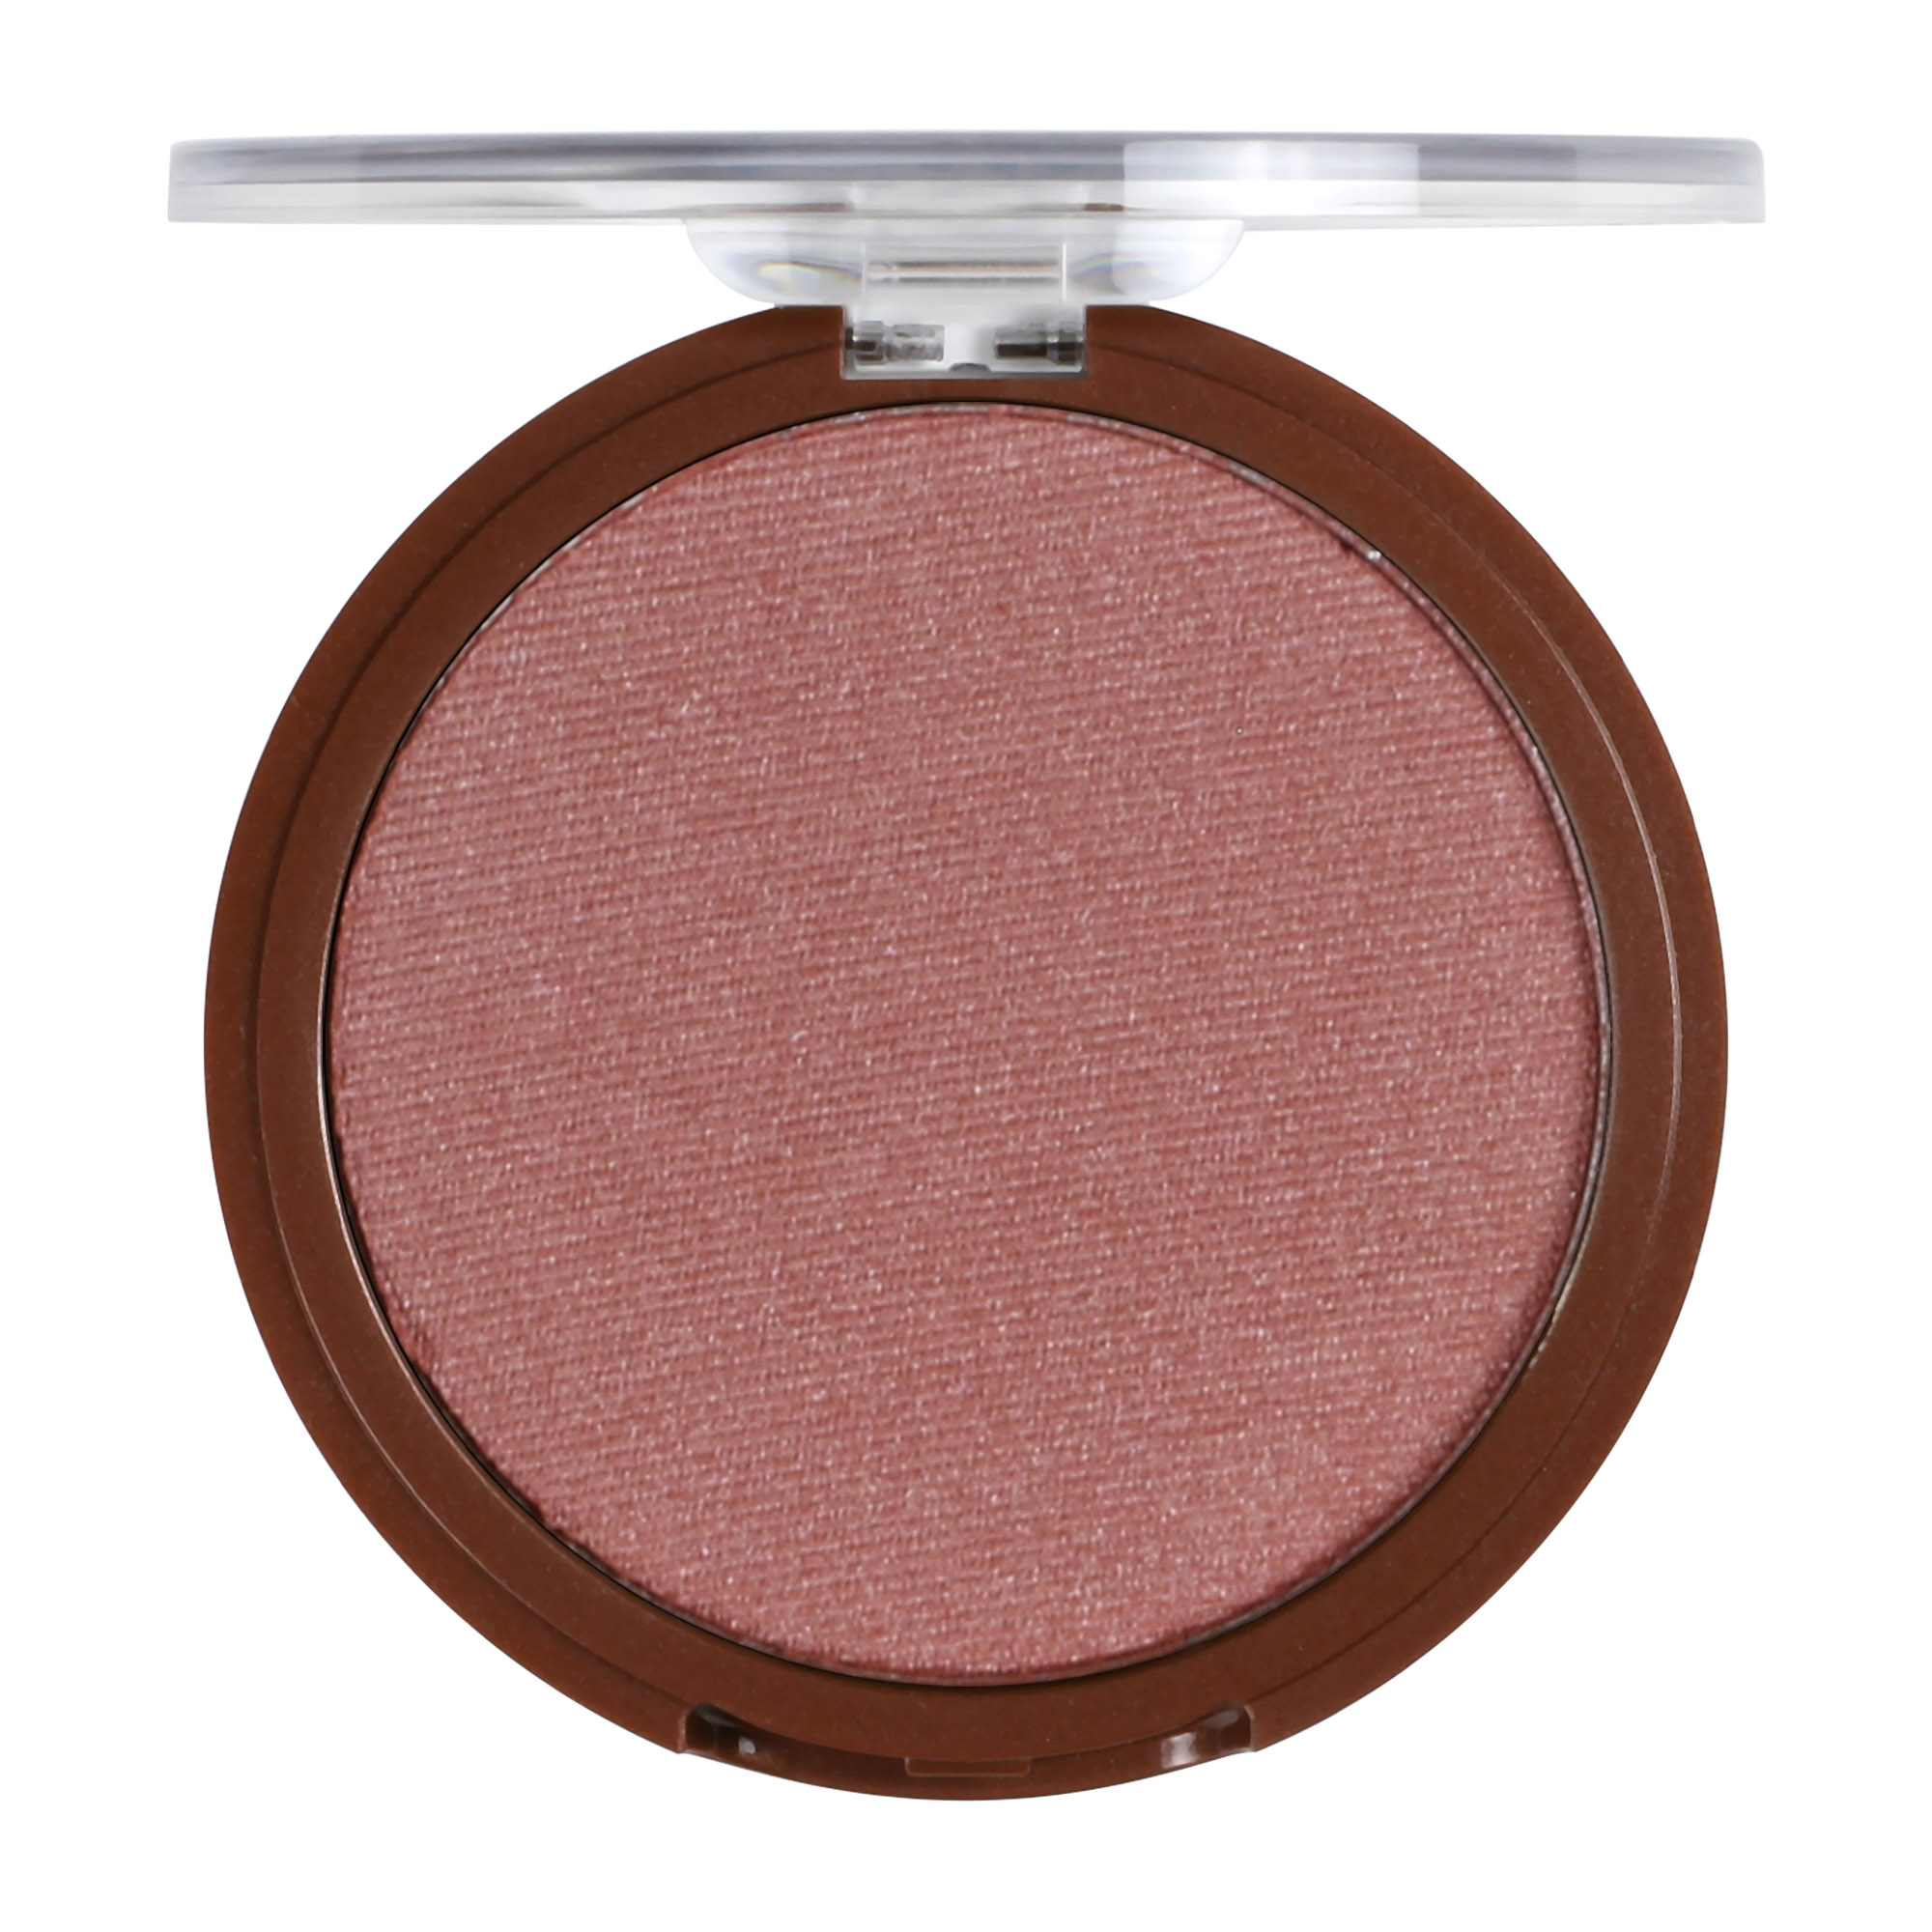 Mineral Fusion Vivid Color Youthful Glow Blush – Airy – Mauve Shimmer